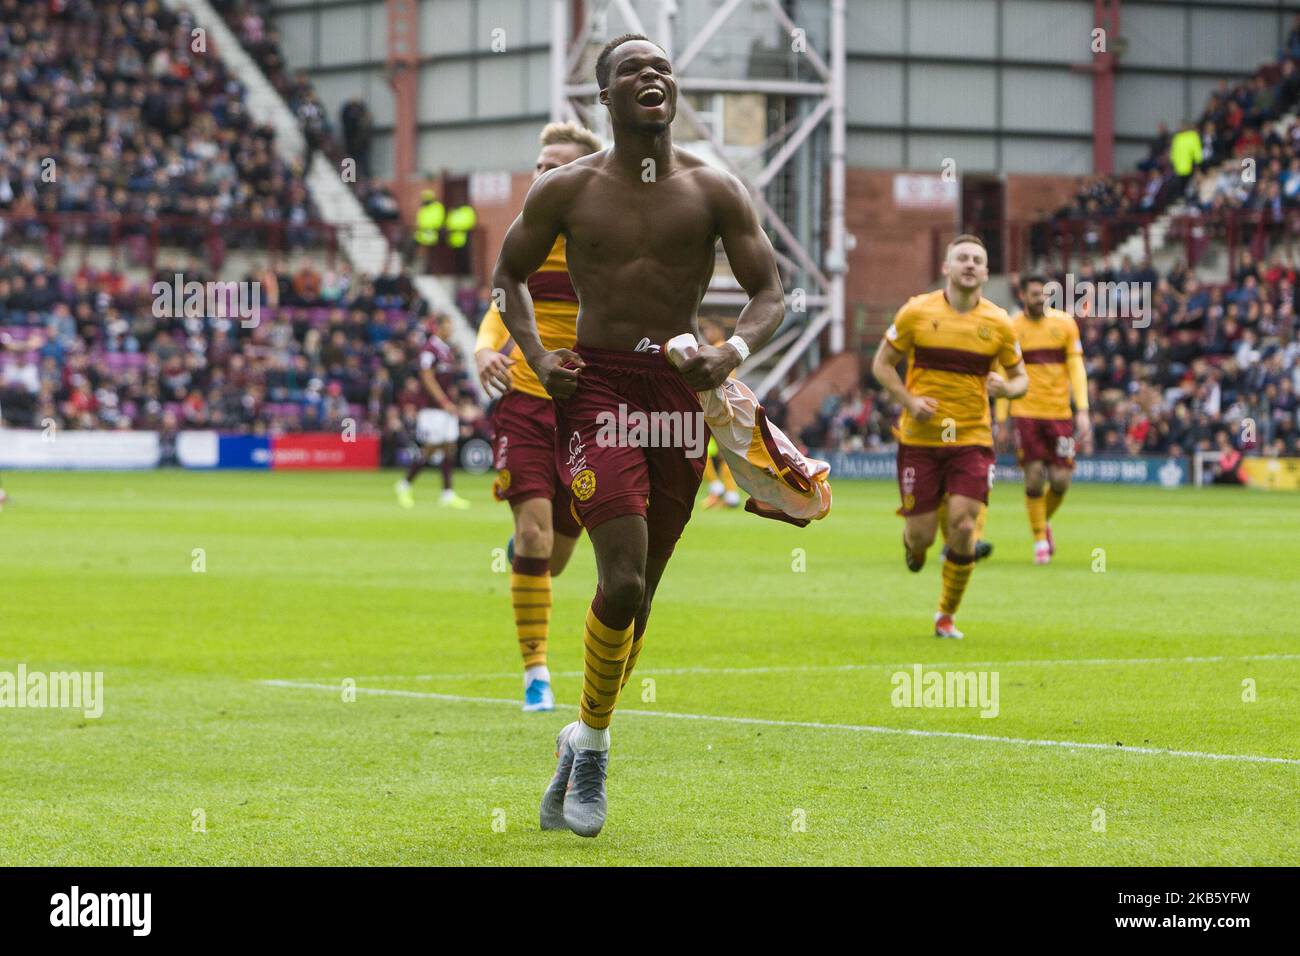 Sherwin Seedorf of Motherwell celebrates scoring his team's second goal during the Scottish Premier League match between Hearts and Motherwell at Tynecastle park on 14 September, 2019 in Edinburgh, Scotland. (Photo by Ewan Bootman/NurPhoto) Stock Photo